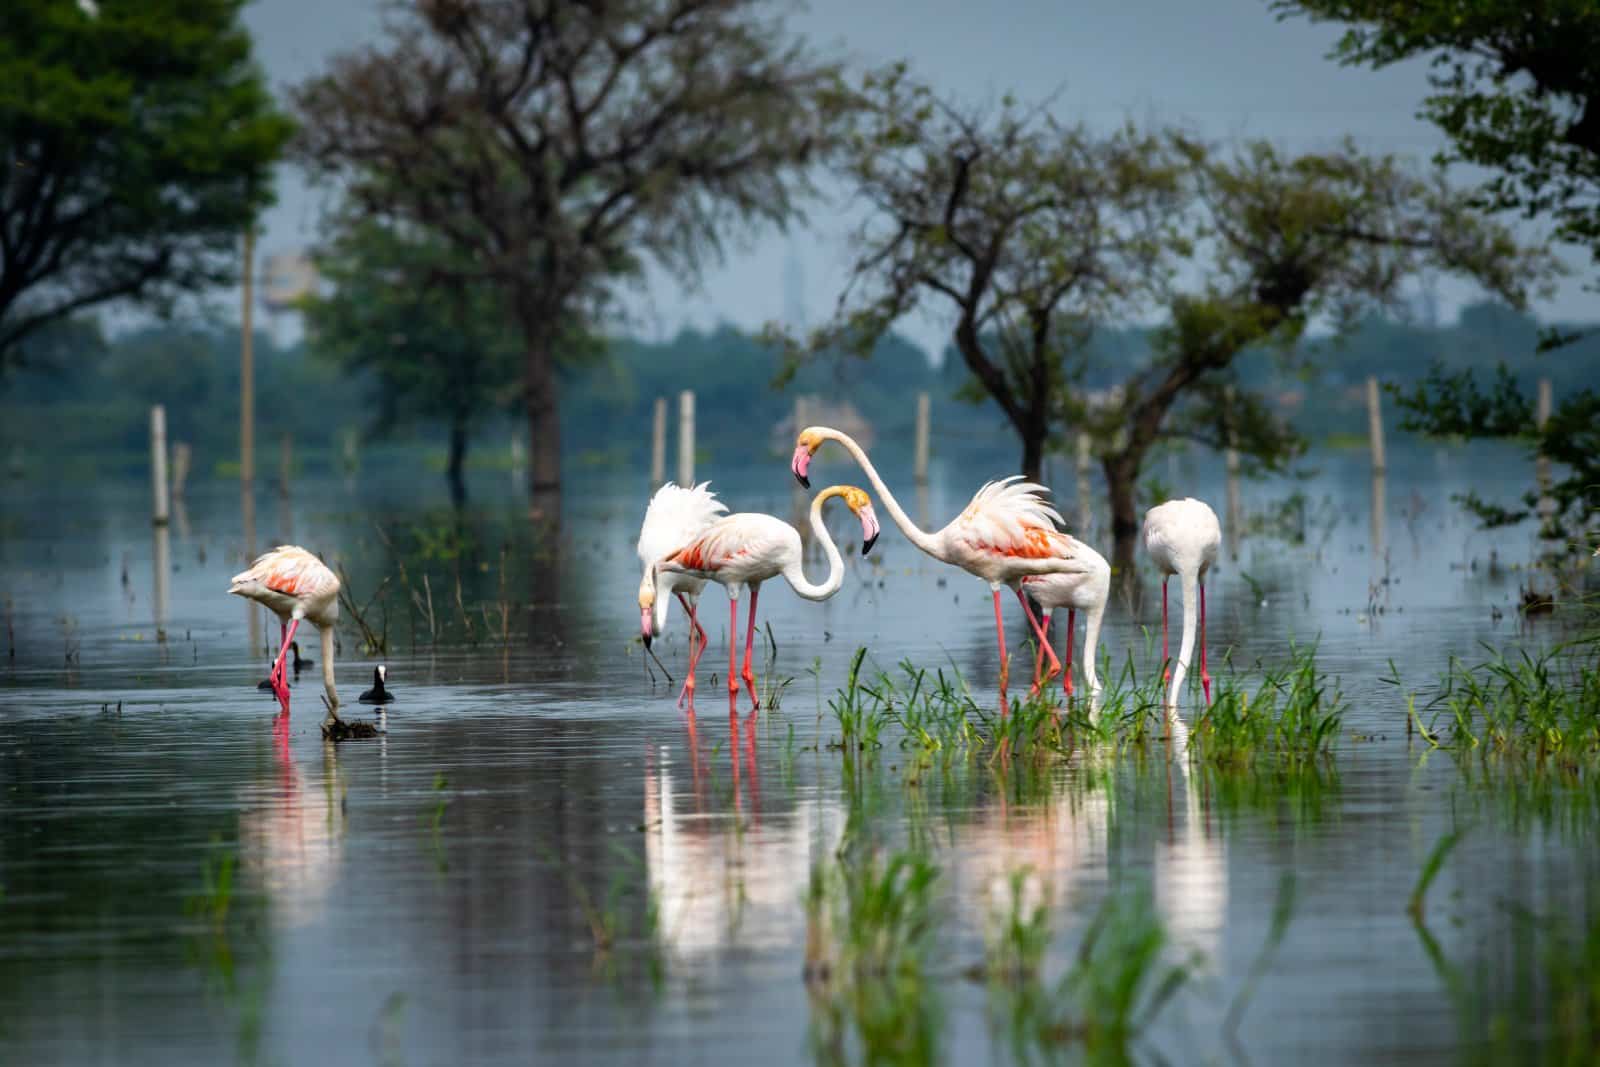 <p class="wp-caption-text">Image Credit: Shutterstock / Sourabh Bharti</p>  <p><span>Also known as Keoladeo Ghana National Park, Bharatpur Bird Sanctuary is a haven for bird watchers, hosting thousands of birds, especially during the winter when migratory species arrive. Over 230 species of birds have been spotted here, including the rare Siberian crane. The park’s wetlands, woodlands, and grasslands provide diverse bird habitats and wildlife habitats. Walking, cycling, and rickshaw tours led by knowledgeable guides offer intimate encounters with the park’s avian inhabitants.</span></p>